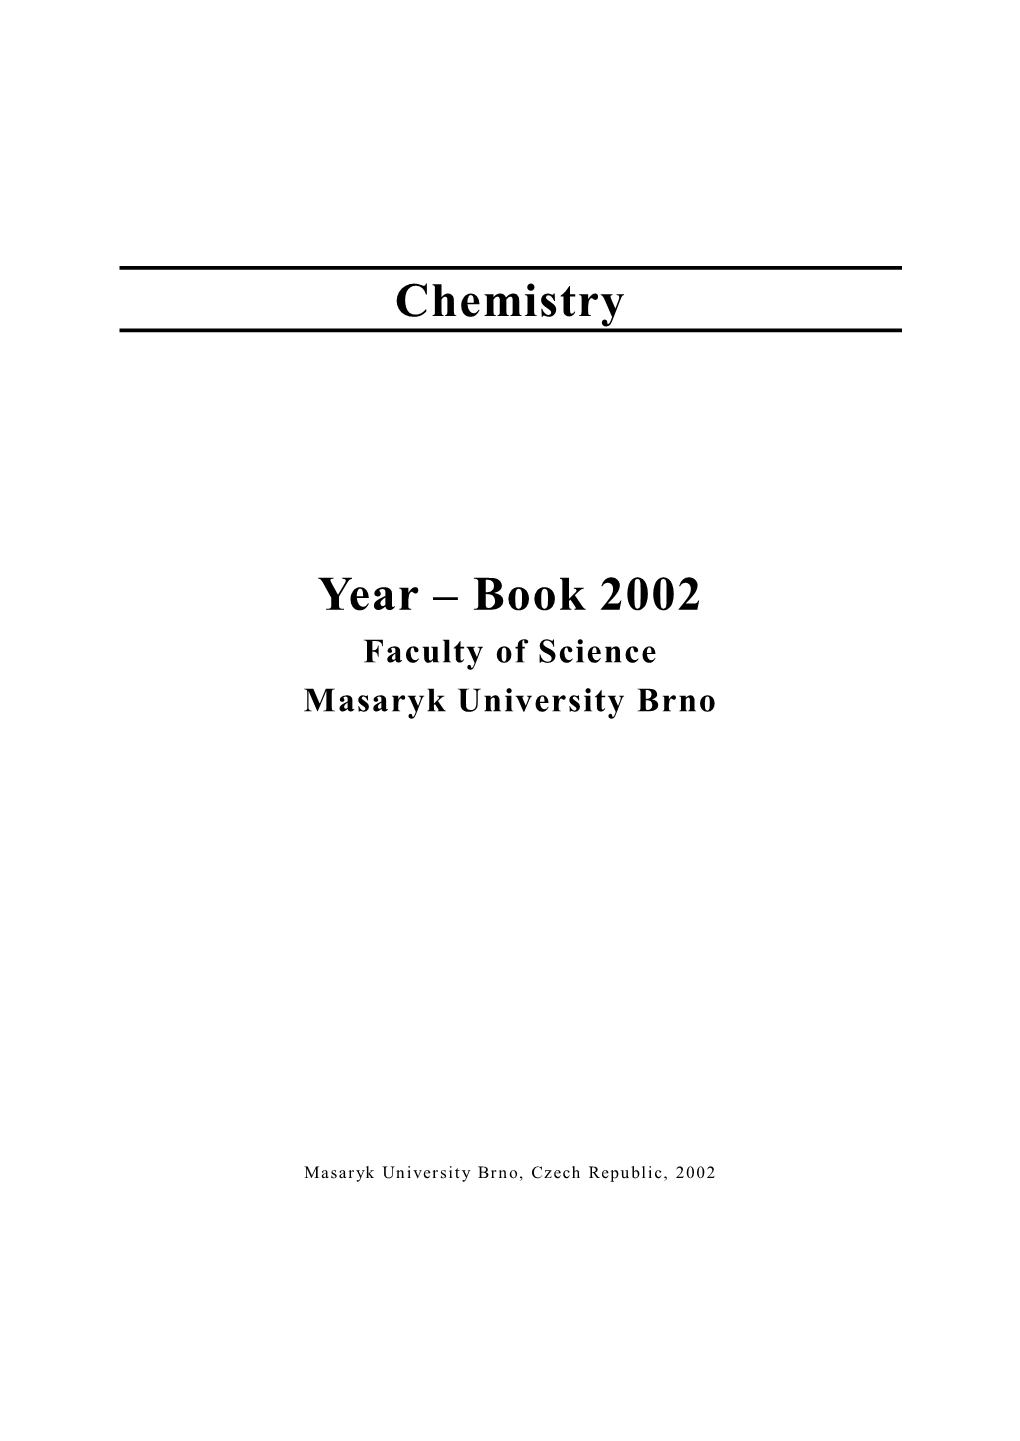 Year-Book 2002, Chemistry